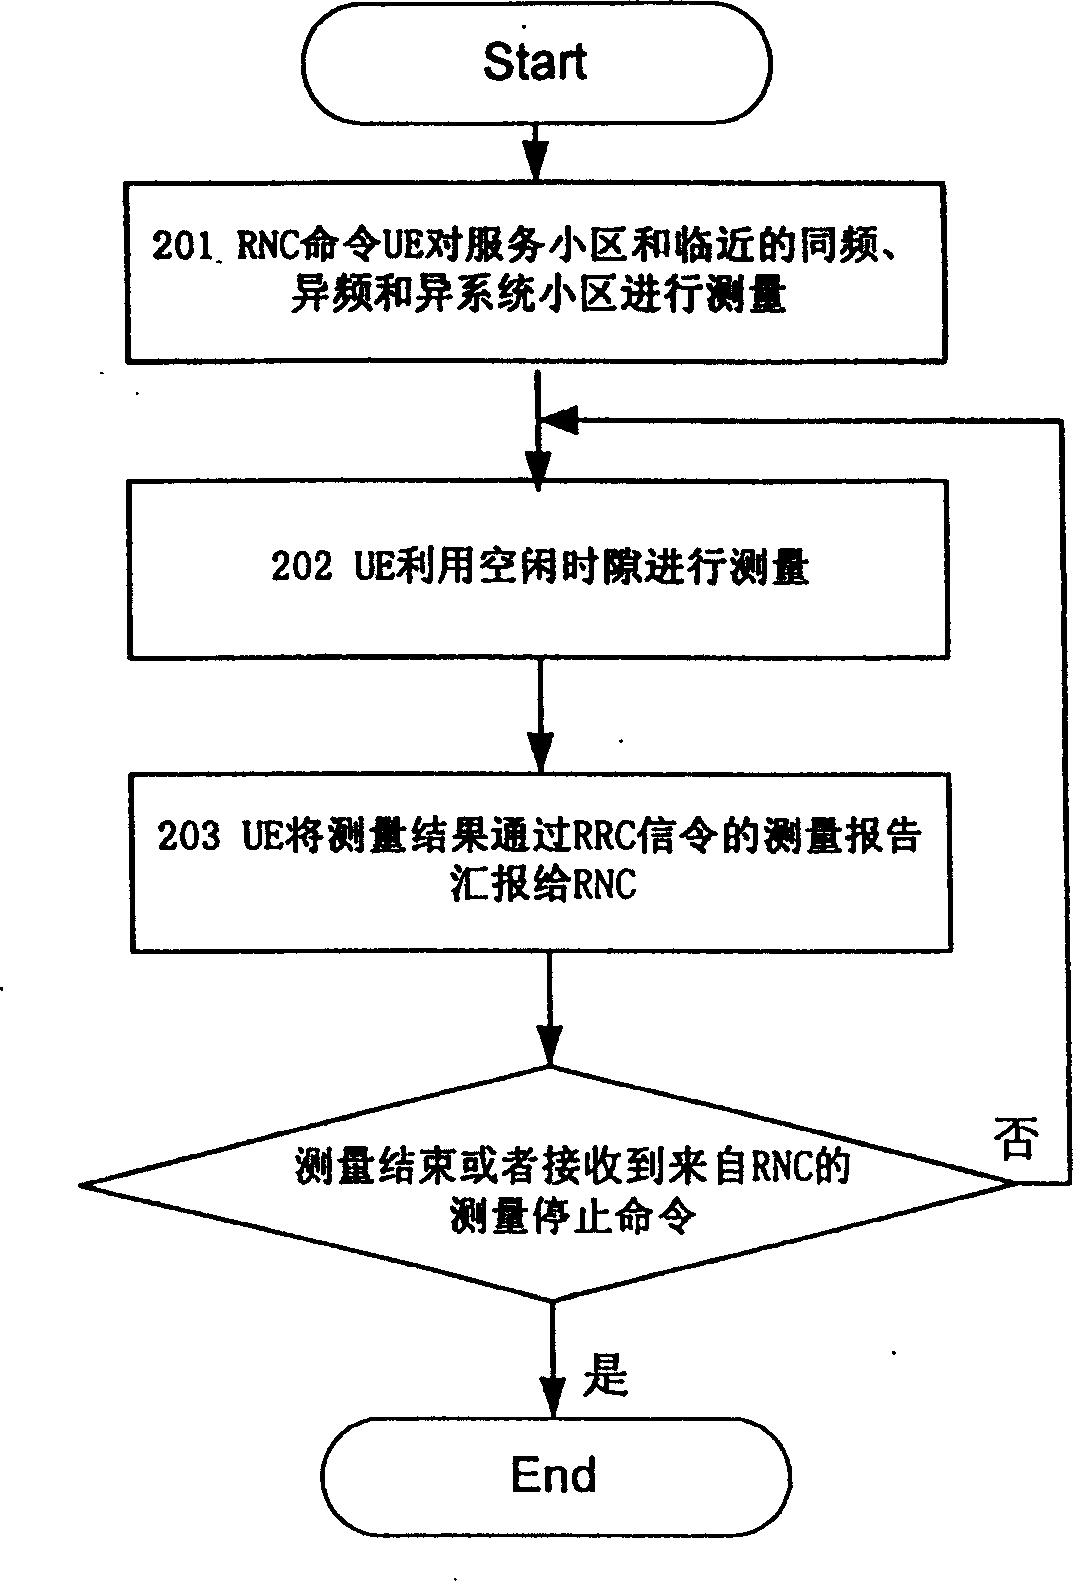 Measurement method for switching inter RNC control frquency and intersystem